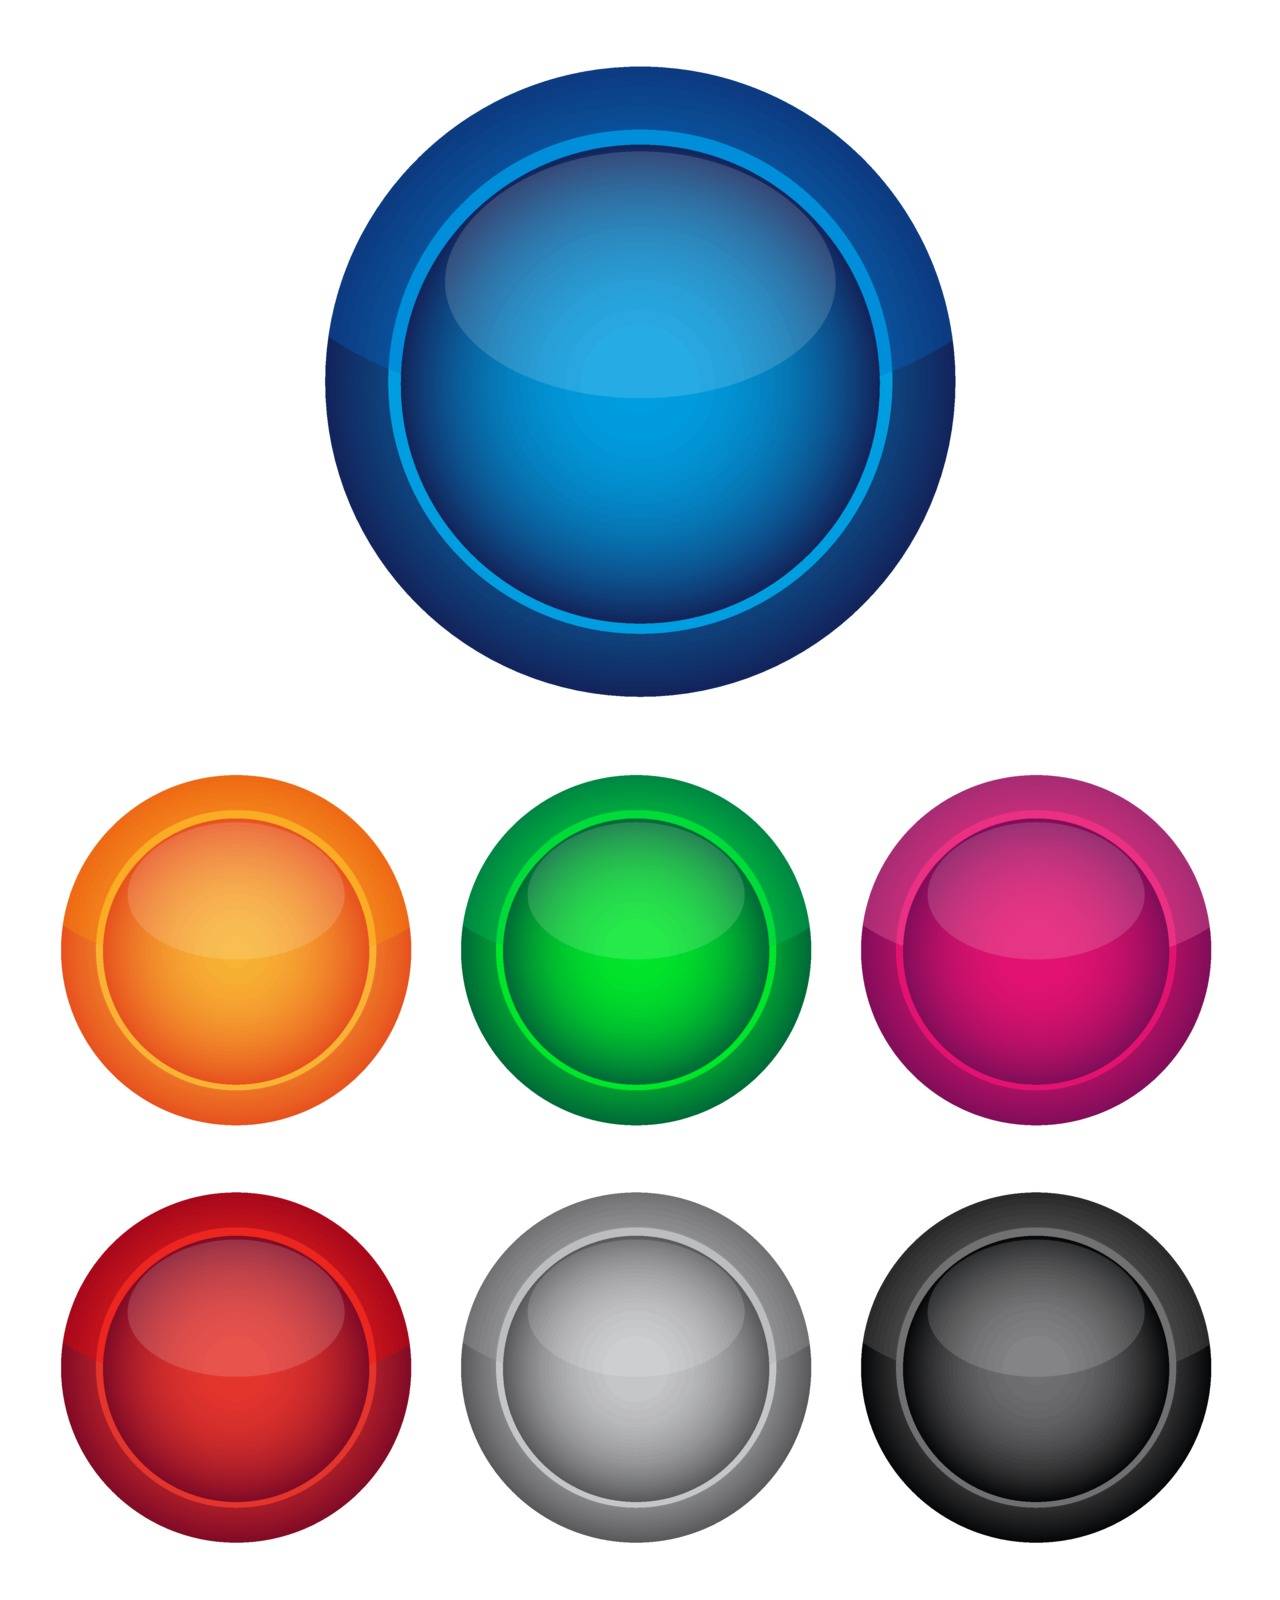 Colorful buttons by simo988